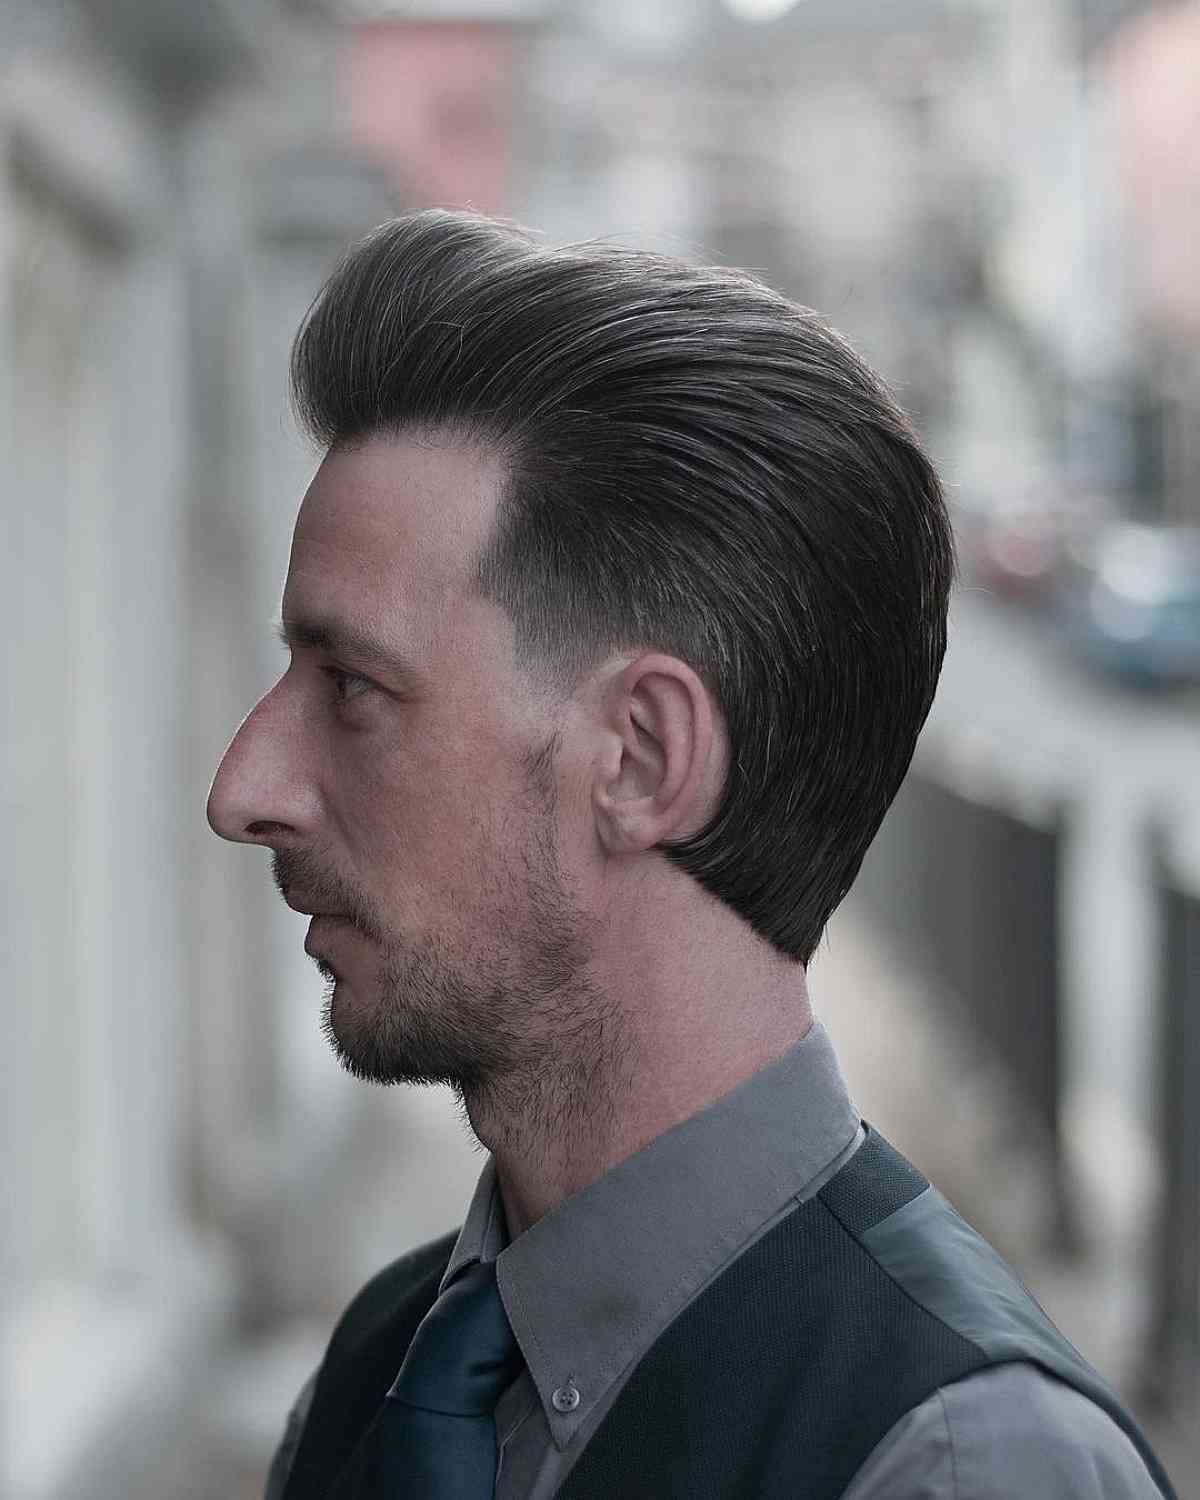 These Are Popular Slick Hairstyles for Men